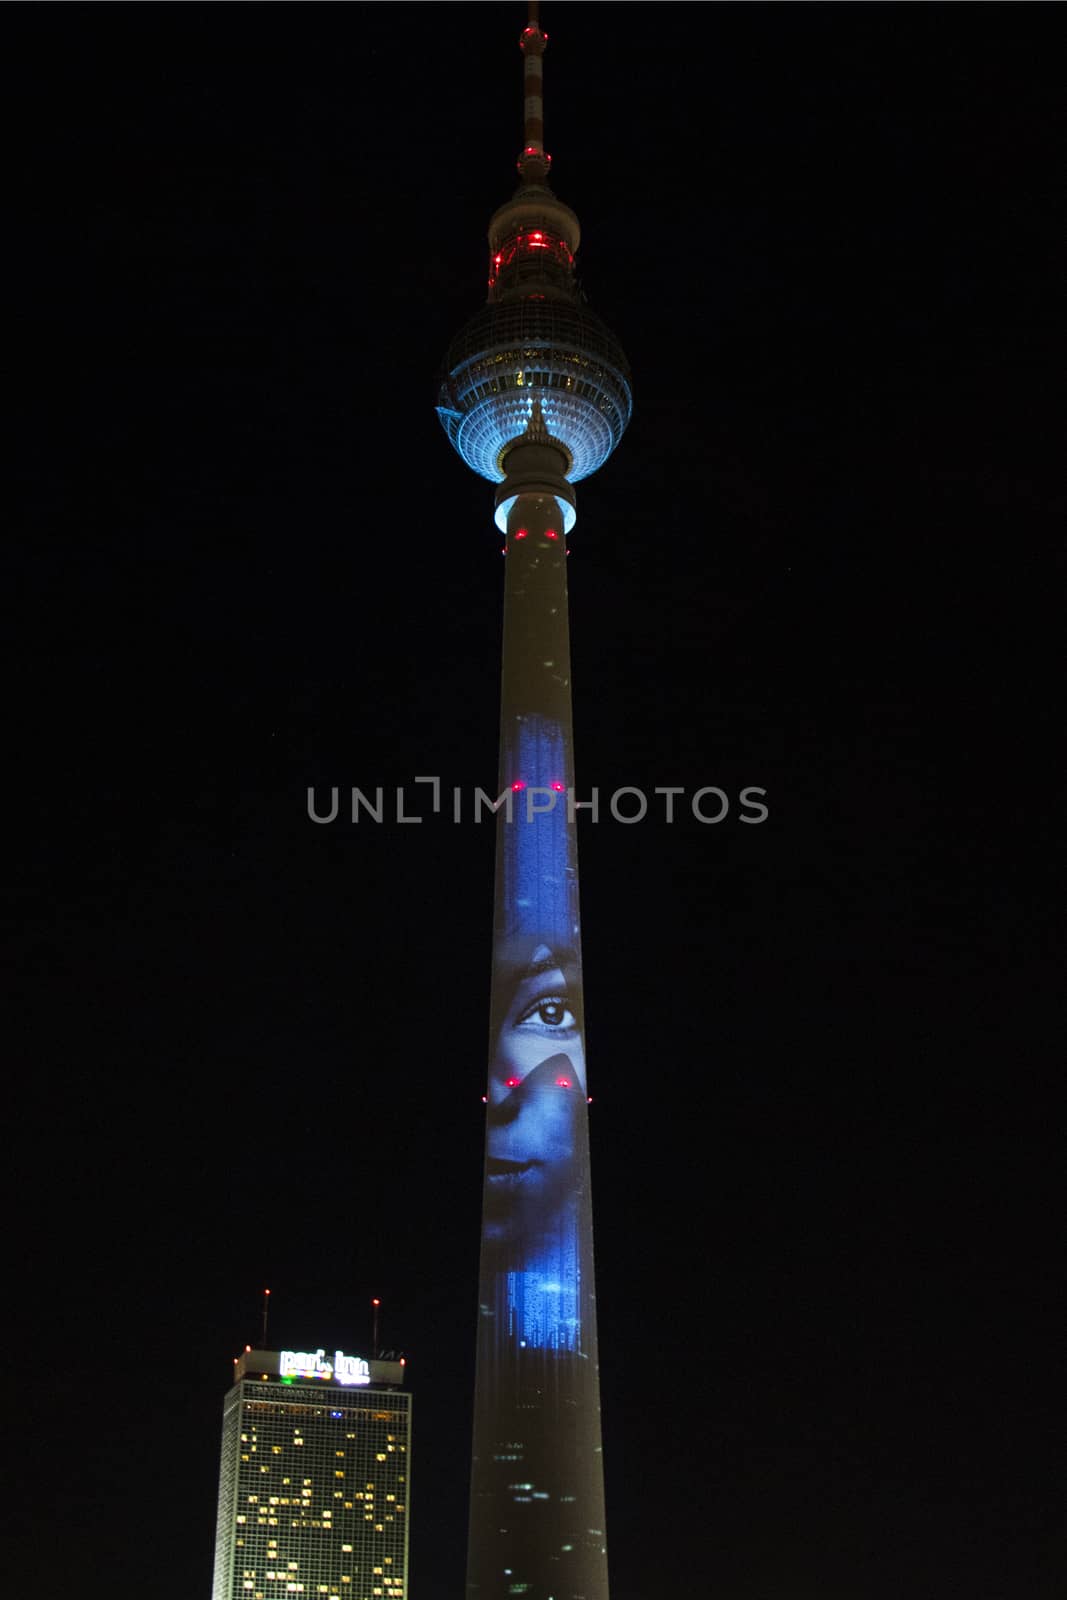 Berlin light festival in 2017 , sideshow on the buildings and landmarks,colorful lights and industrial art. by Taidundua